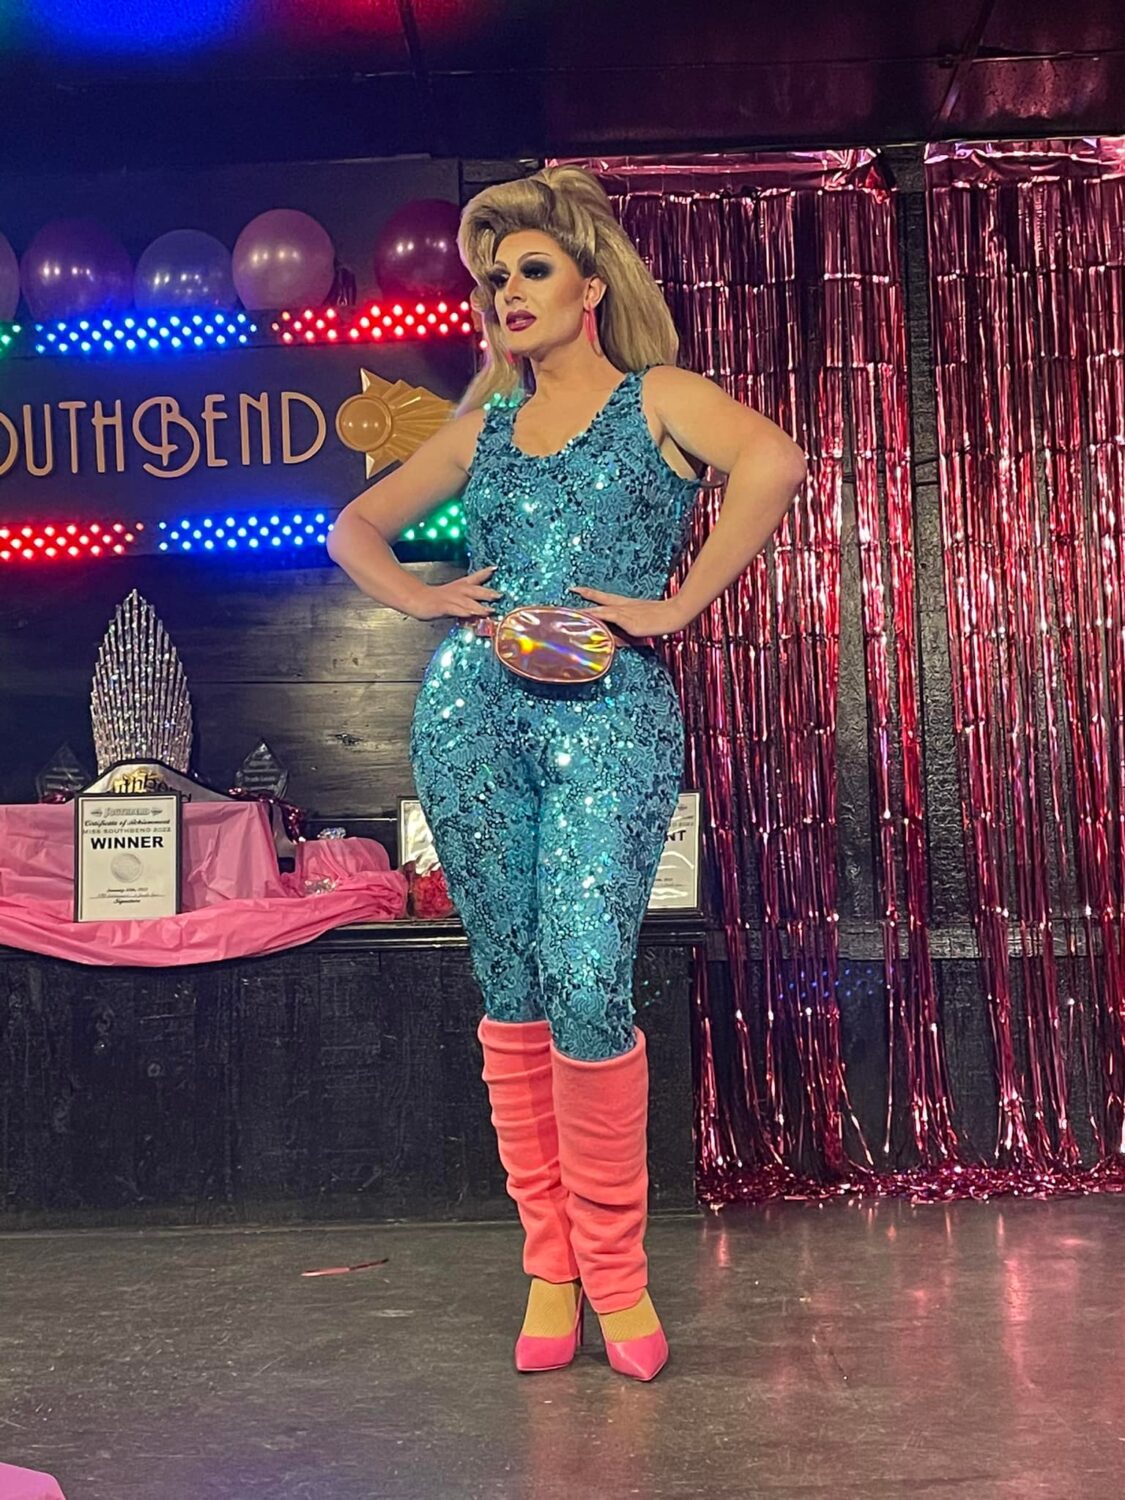 Anaslaysia Annejob in Presentation Category | Miss Southbend Pageant | Southbend Tavern (Columbus, Ohio) | 1/30/2022 [Photo by Vintage Blue]